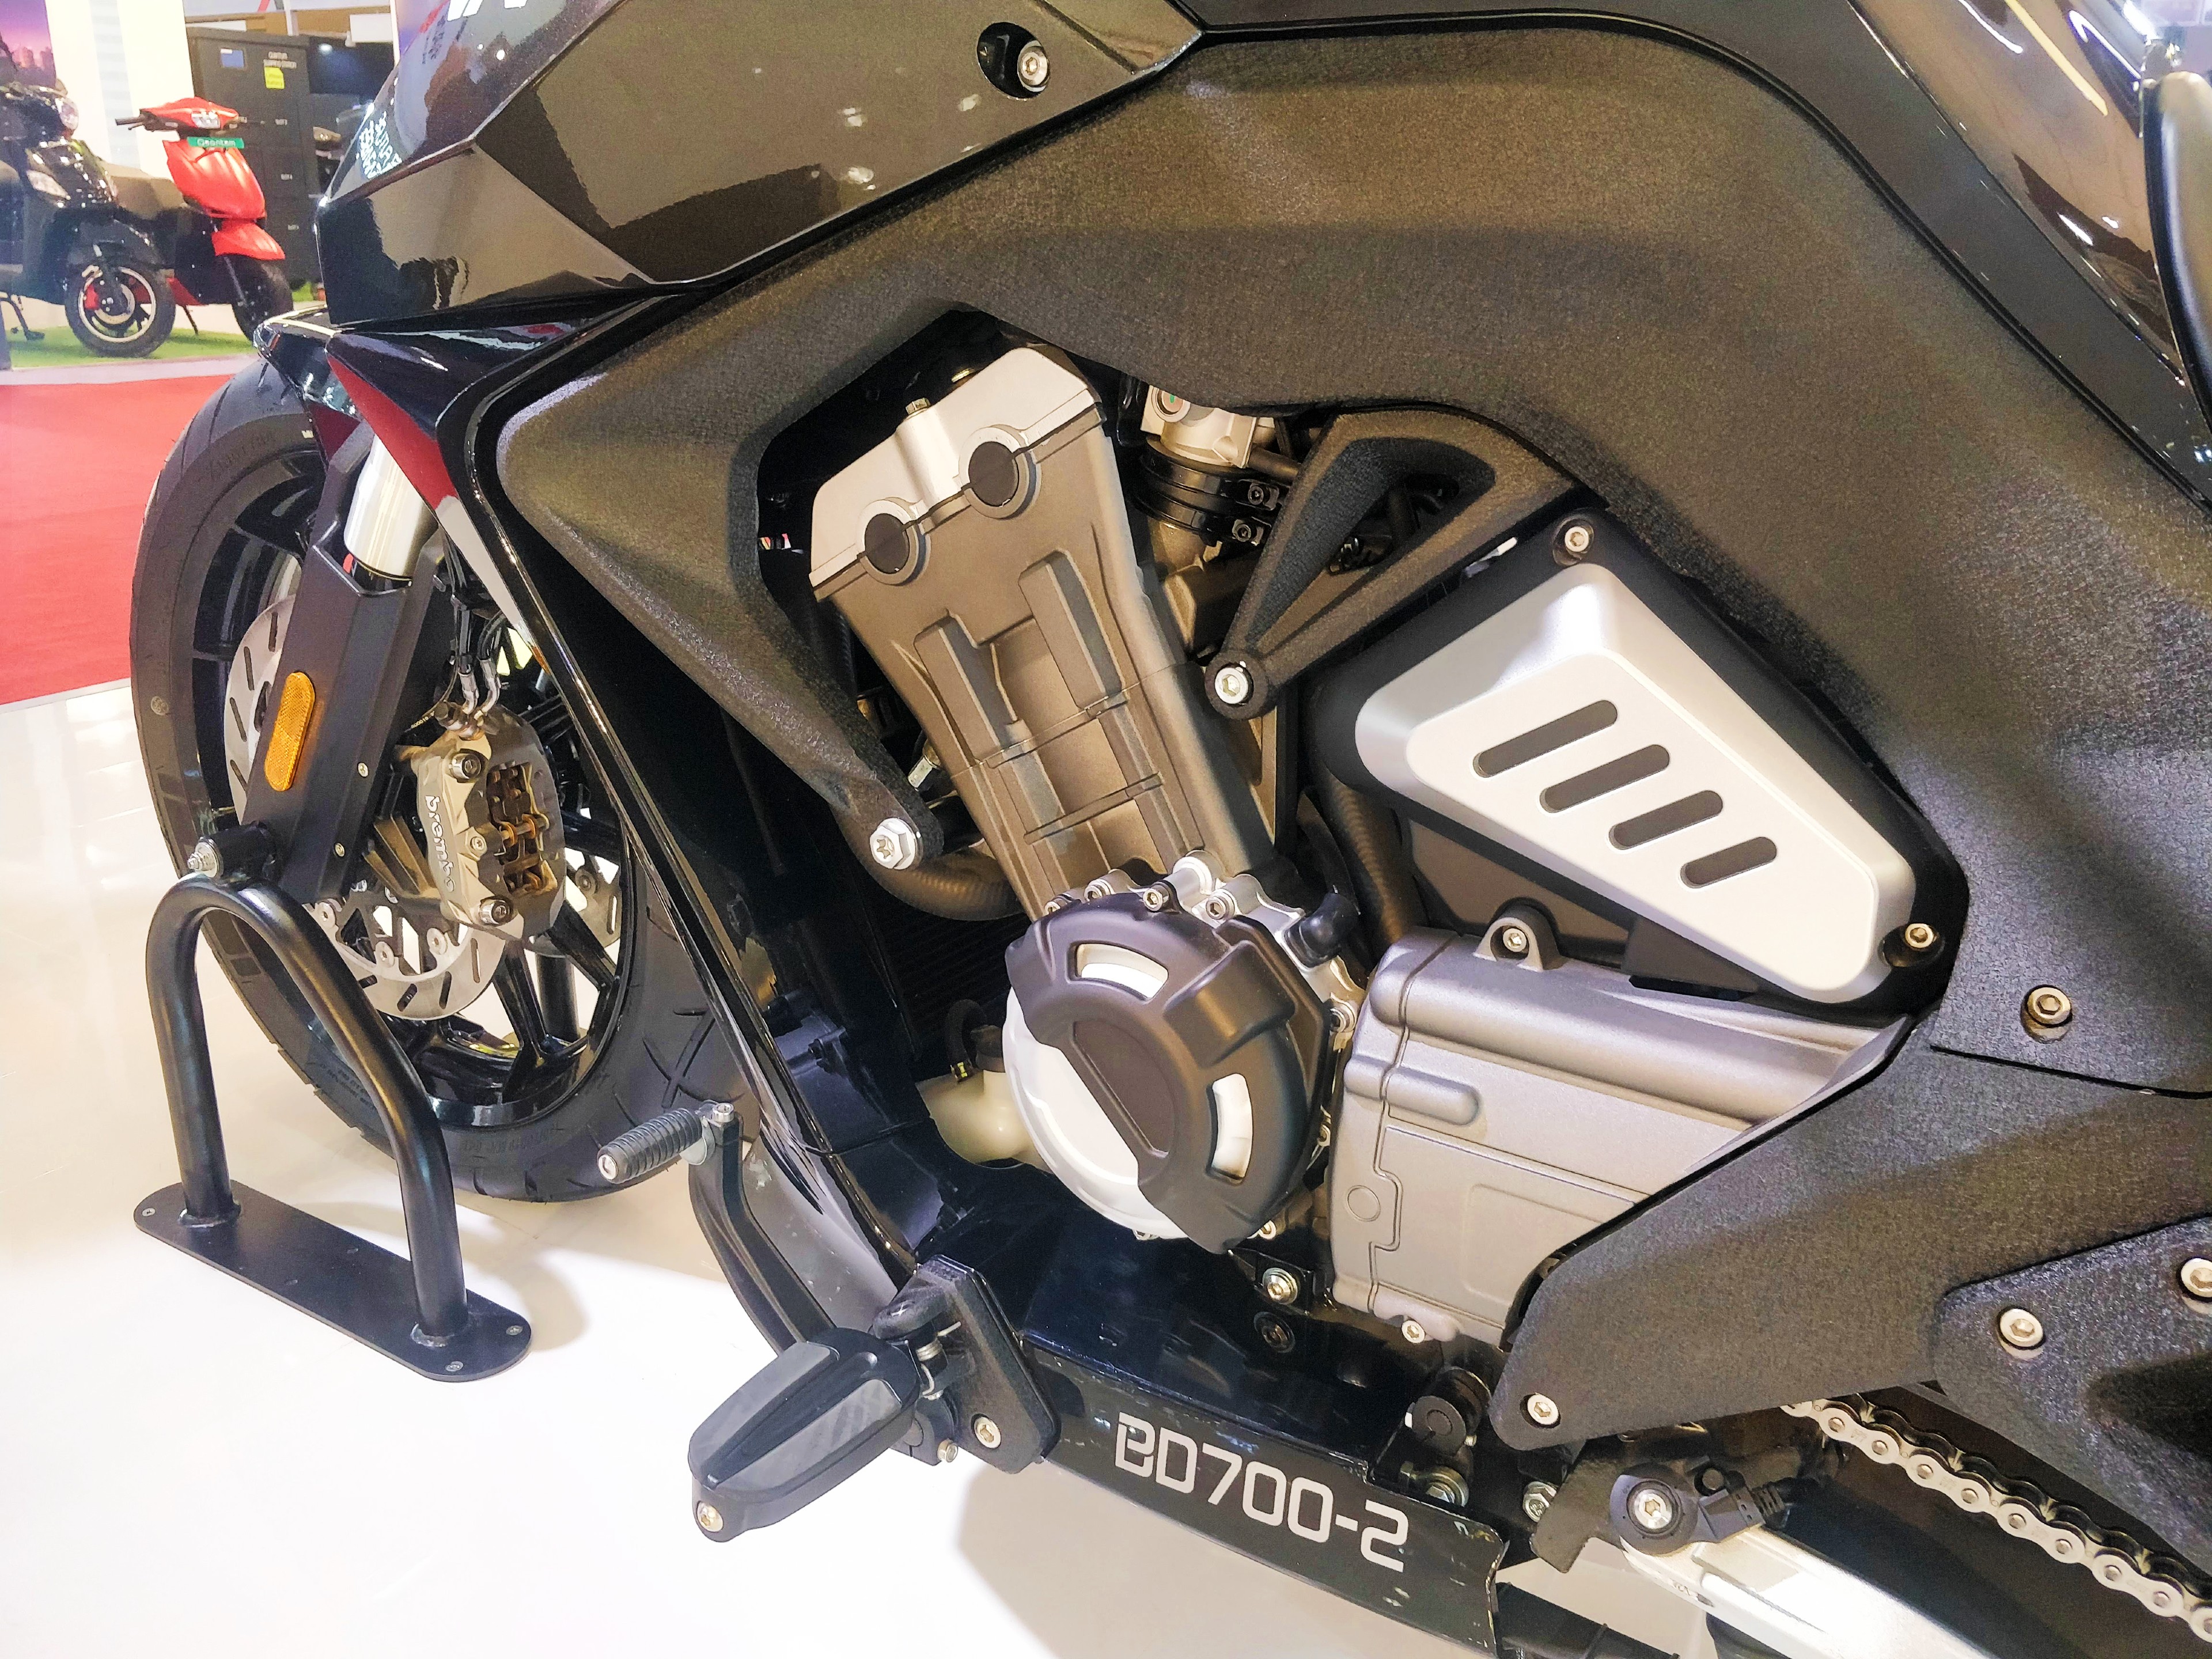 The Benda LFC700 is powered by a 680 cc four-cylinder engine tuned for 91 hp and 63 Nm of peak torque.  Dry weight is 270 kg. 